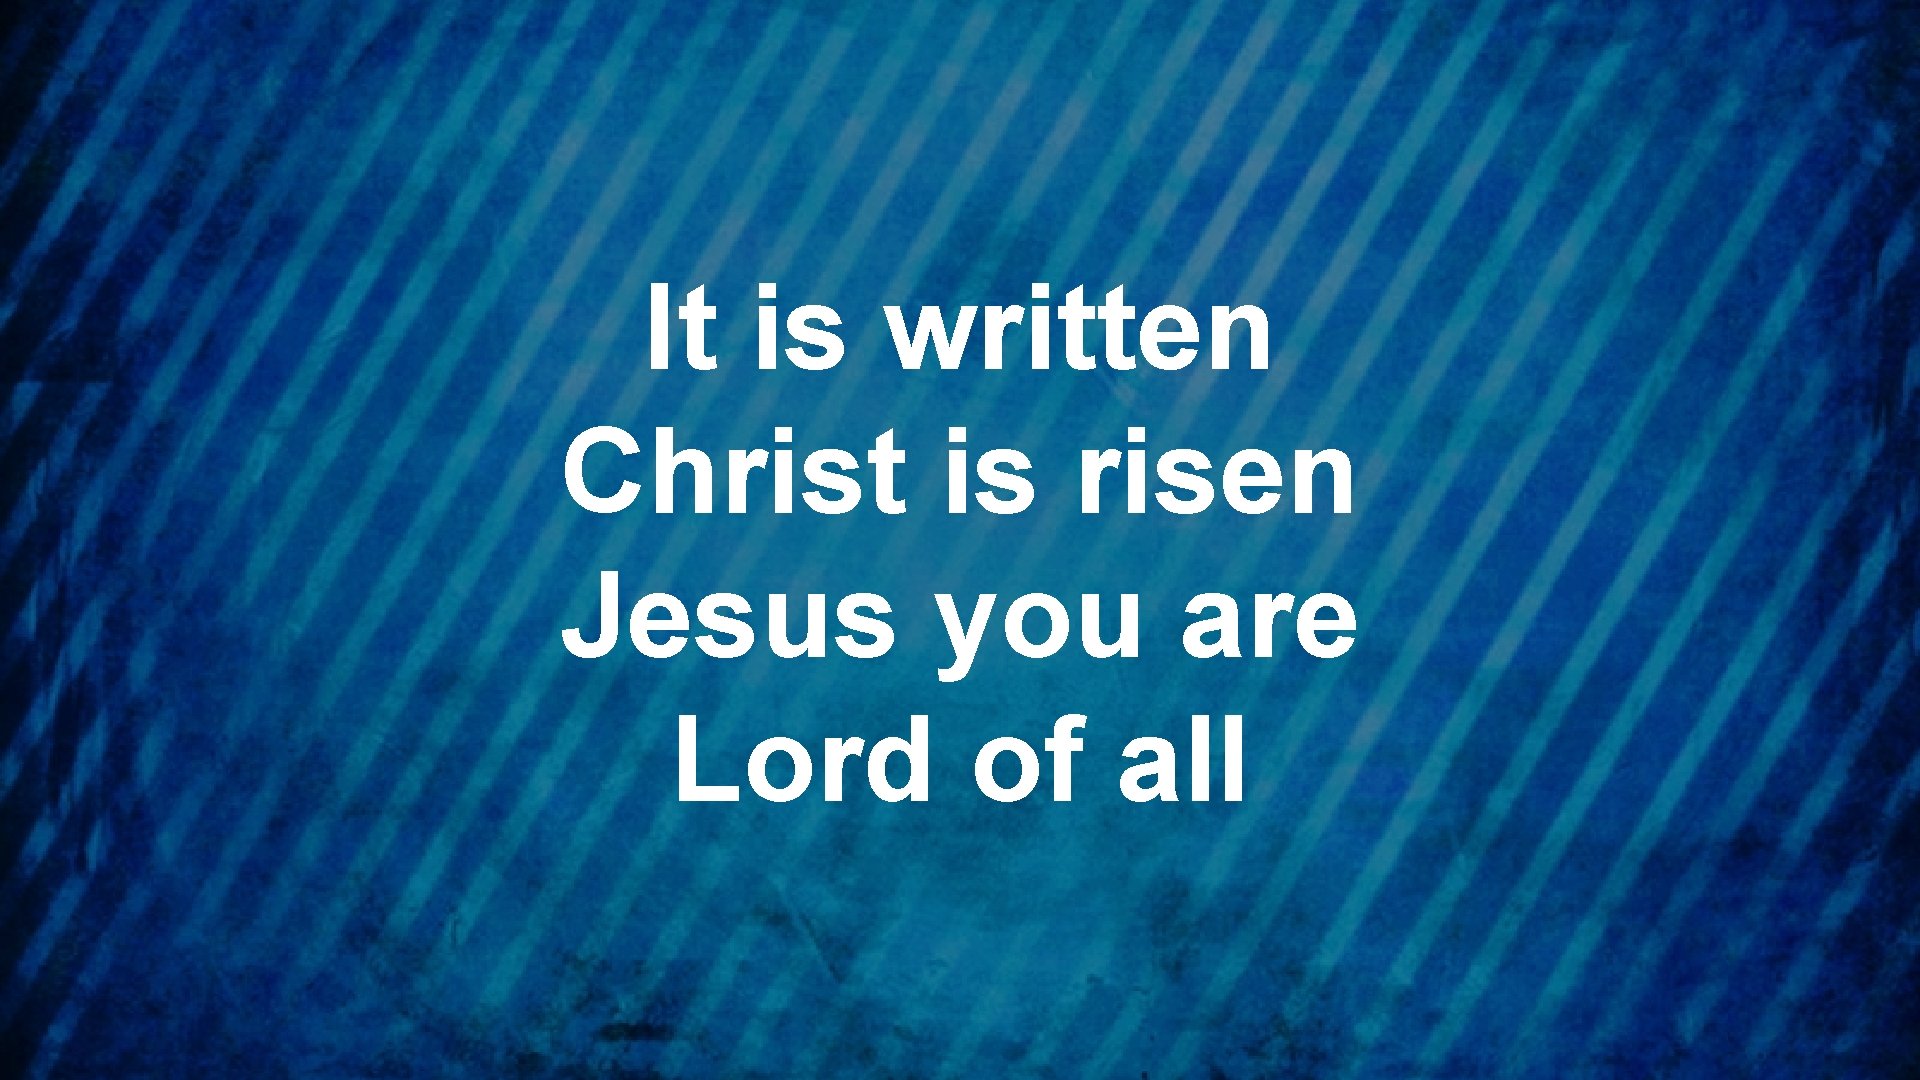 It is written Christ is risen Jesus you are Lord of all 